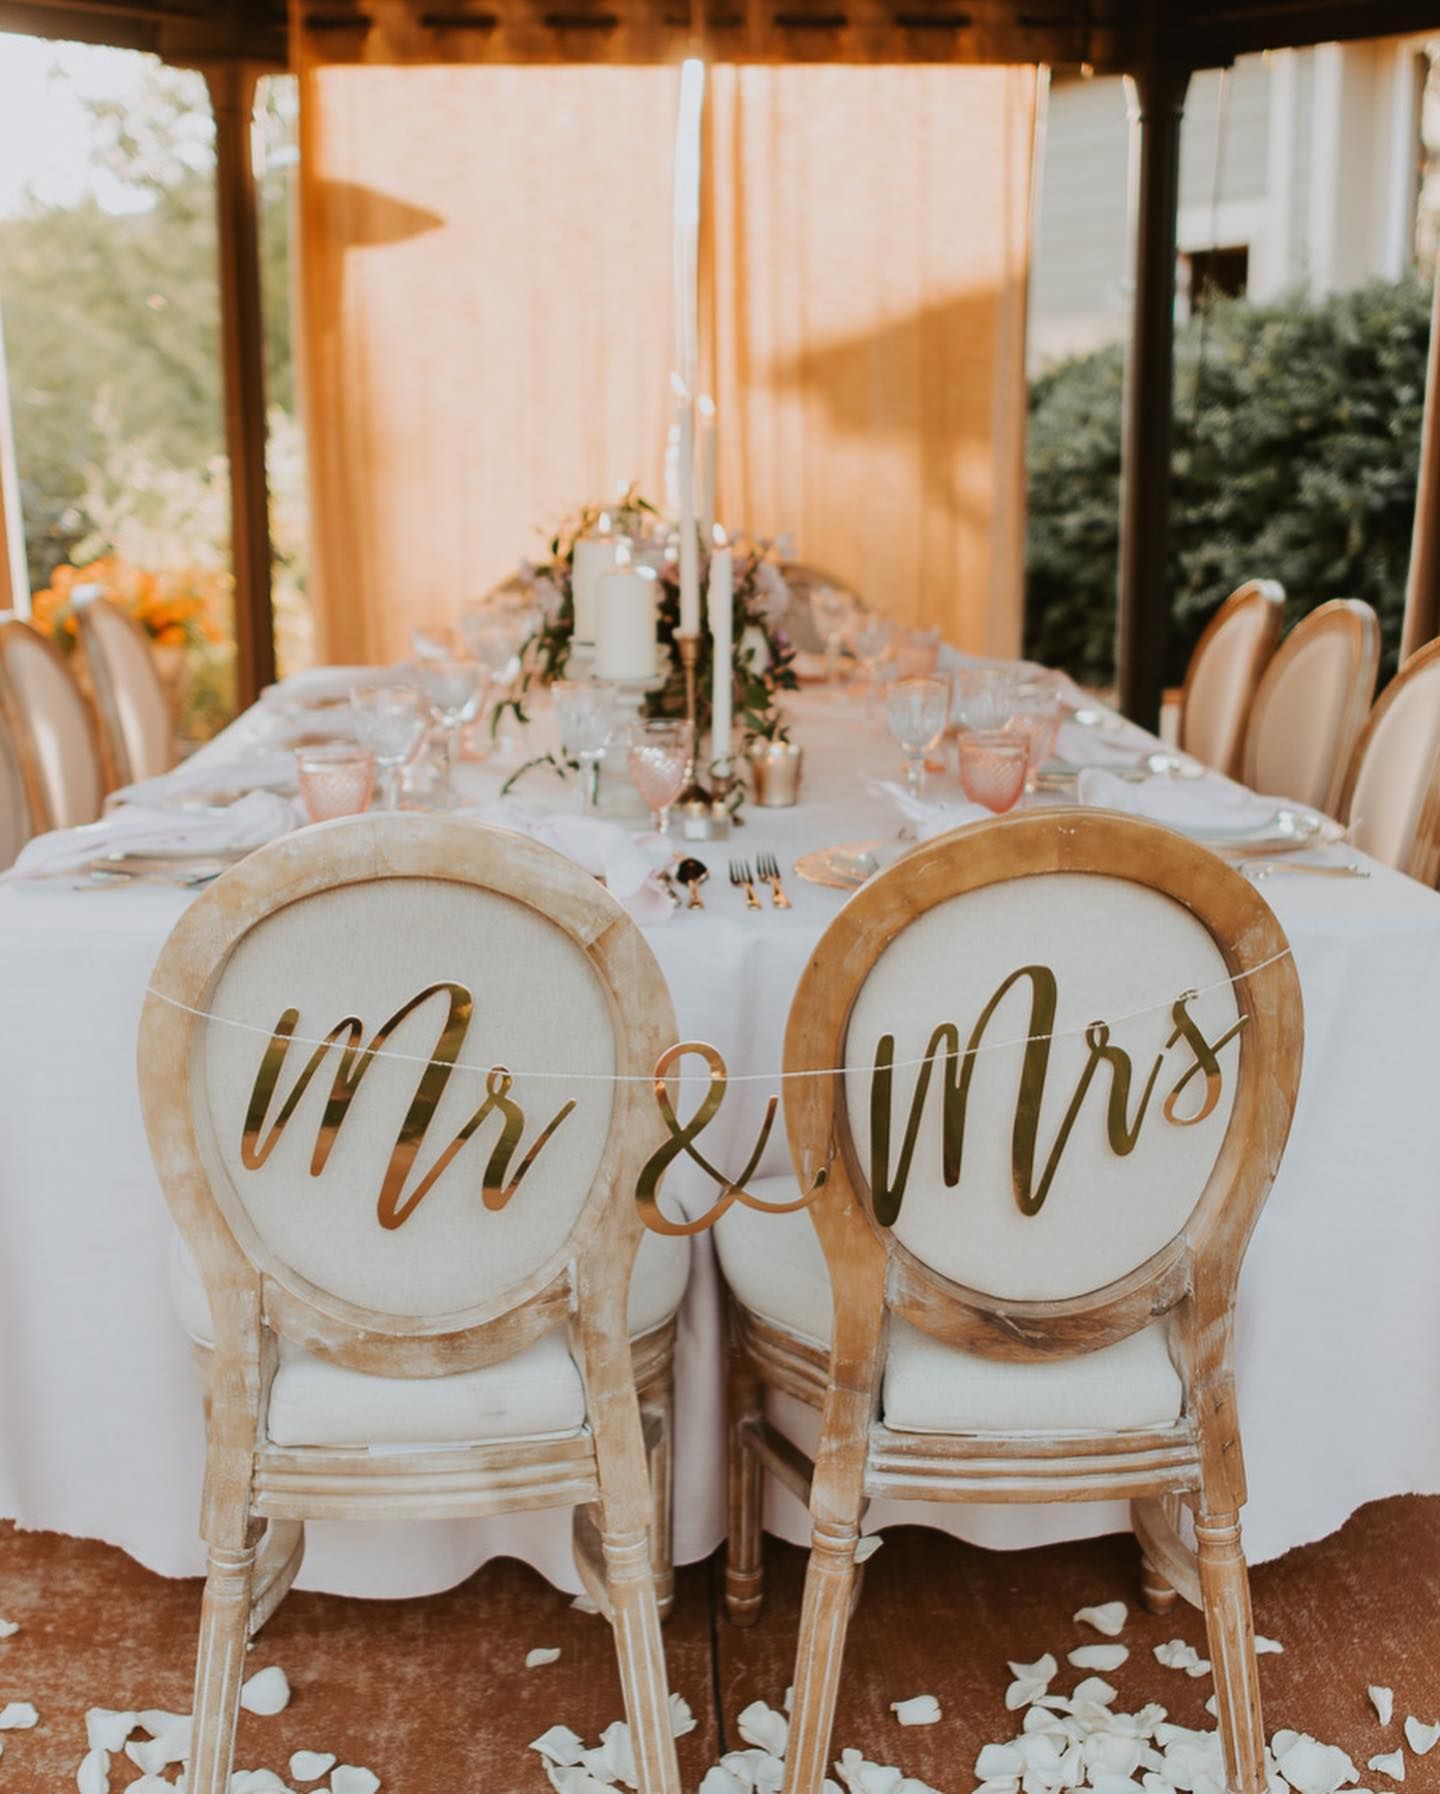 wedding reception table with mr and mrs signs hanging on chairs